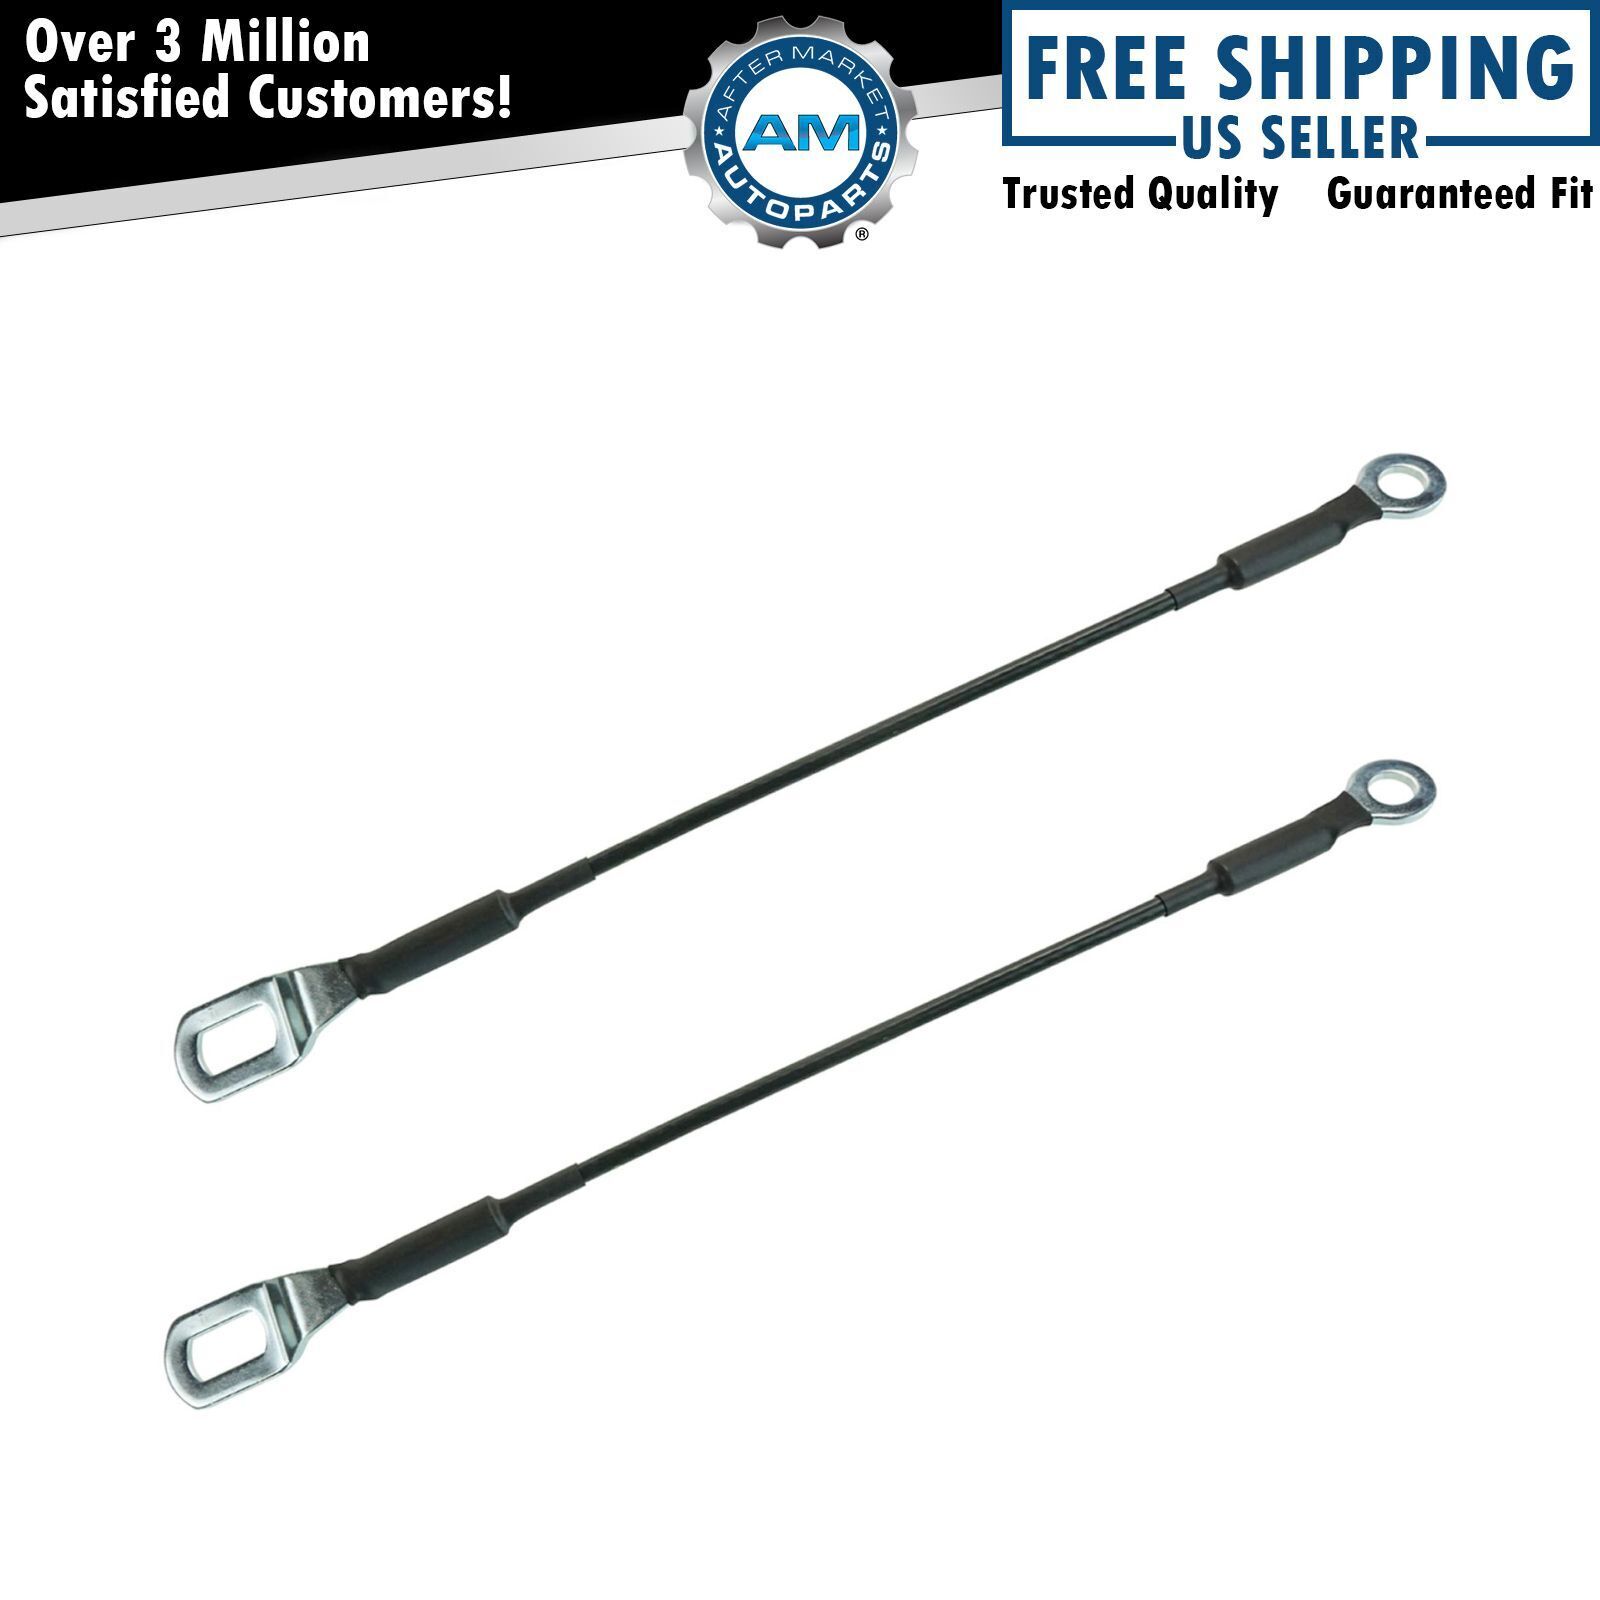 Tailgate Tail Gate Cables Pair Set of 2 NEW for 95-04 Toyota Tacoma Pickup Truck